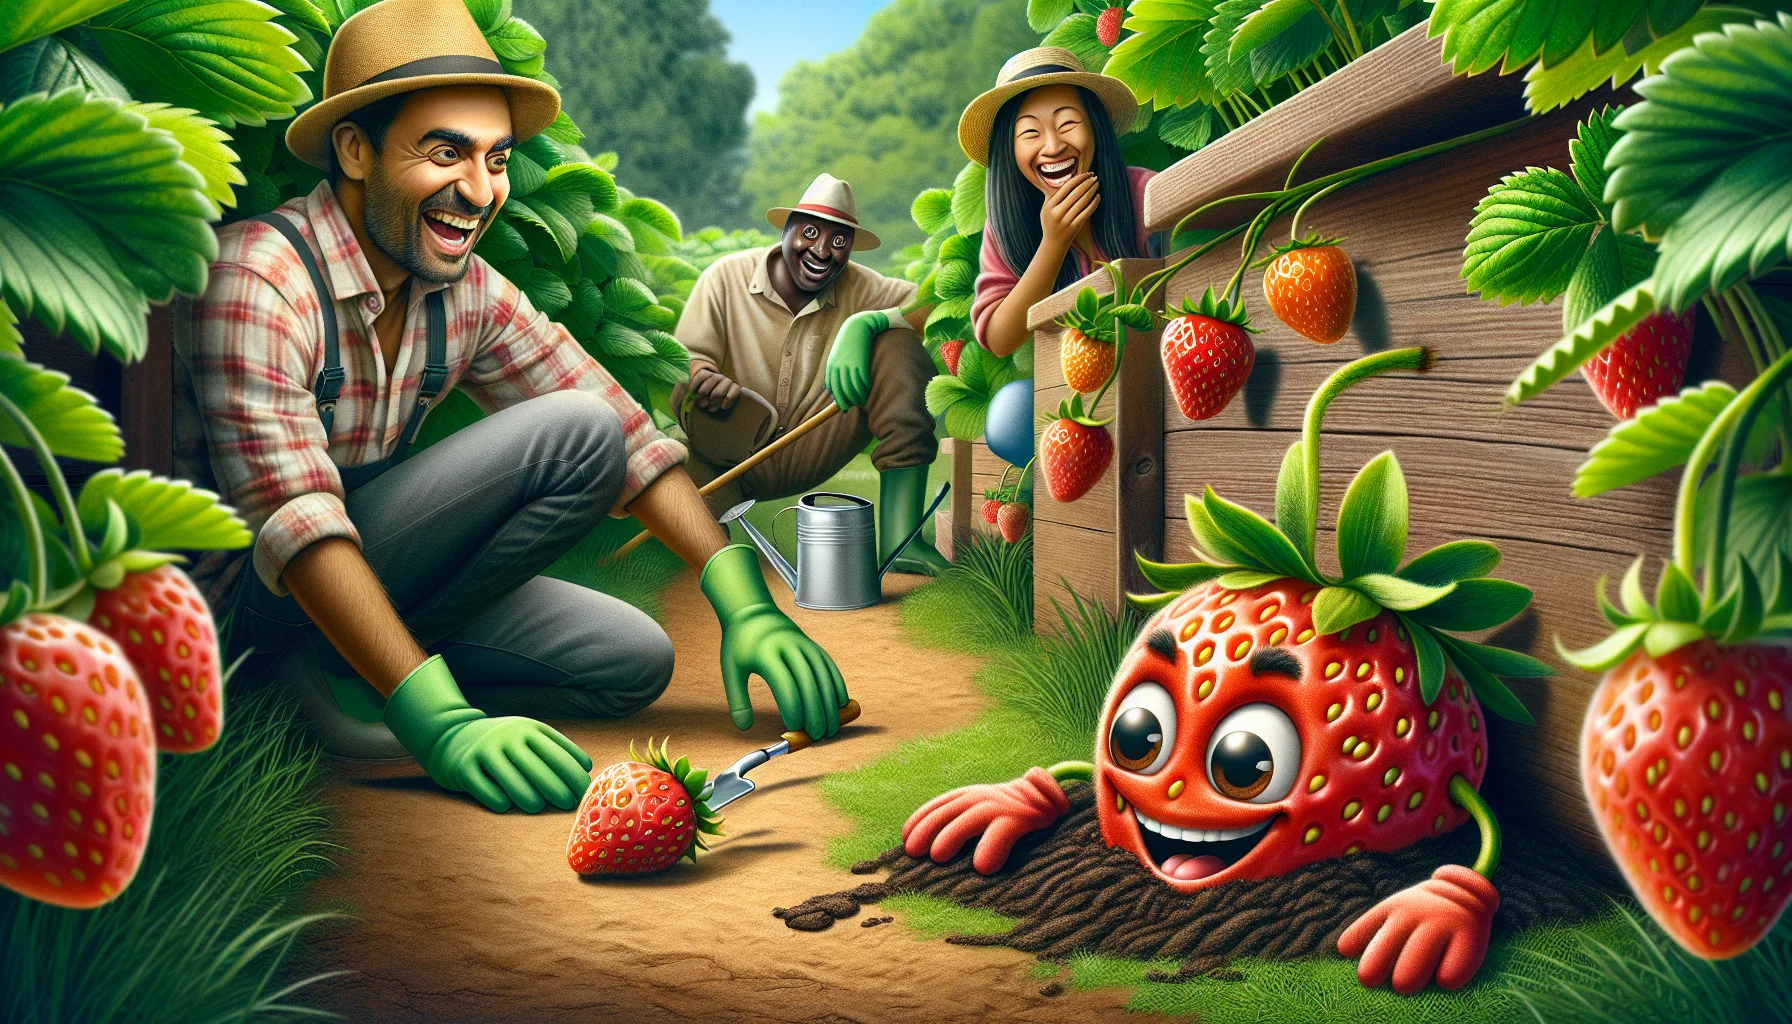 Create a detailed, realistic image of a comical scenario in a lush garden. A tiny, perfectly ripe strawberry with expressive cartoon-like eyes and a mischievous smile, is sneakily sneaking away from a strawberry plant. On the other side, a man of South Asian descent is kneeling on the ground, wearing green gardening gloves, a hat, and a confused expression as he notices the runaway fruit. Nearby, a young woman of Black descent is laughing heartily, holding a watering can. Their enjoyment and unexpected surprise illustrate the joys of gardening.